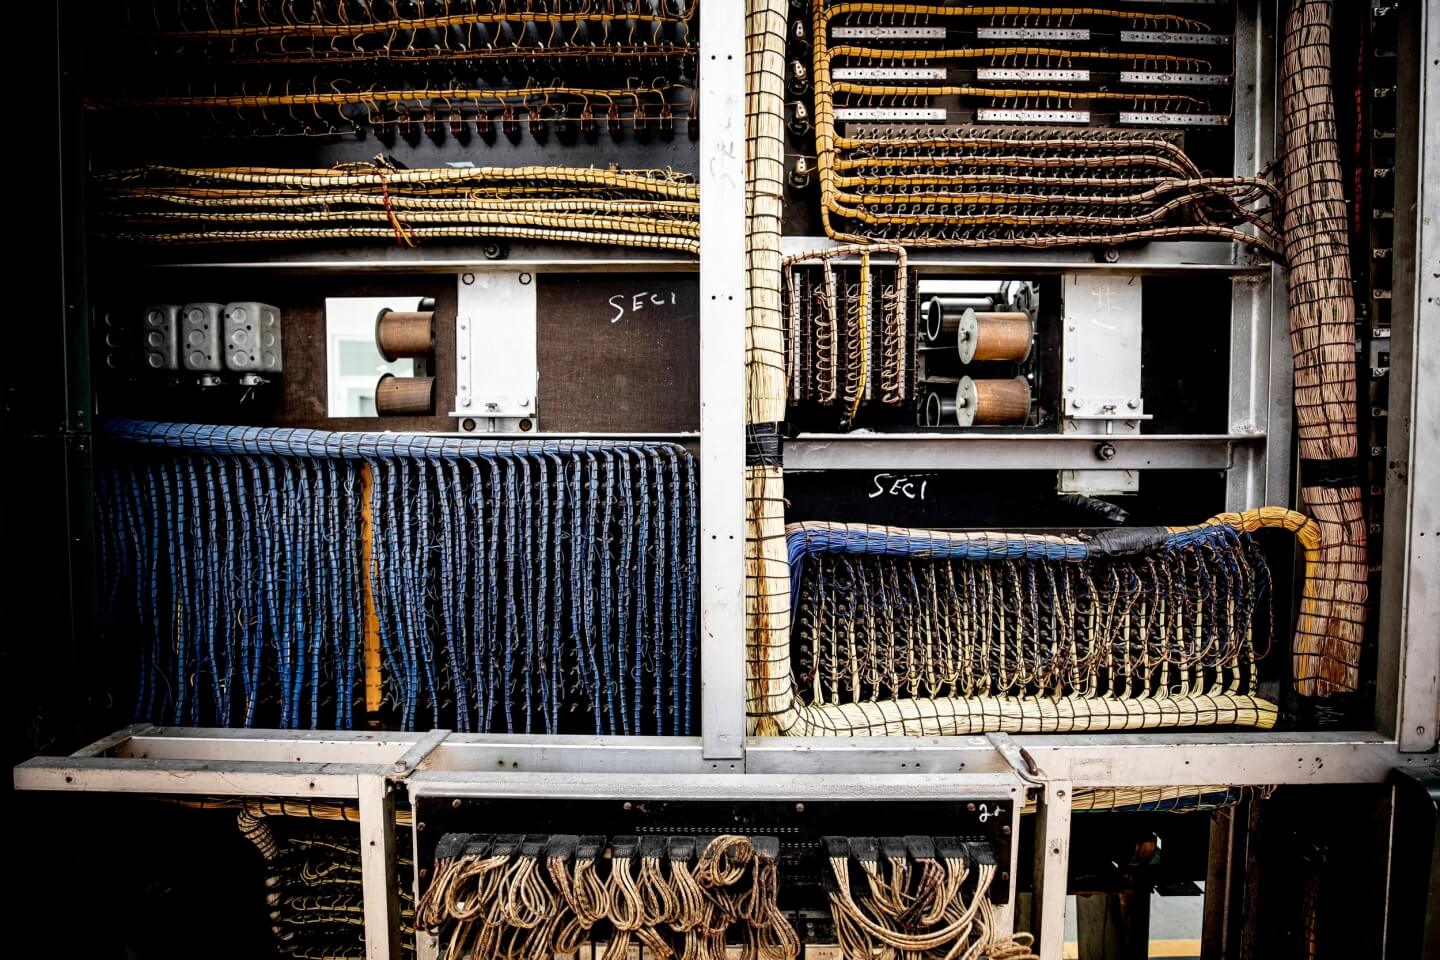 Blue and yellow cords and cables squeeze tighly inside grid-like partitions of the calculator.